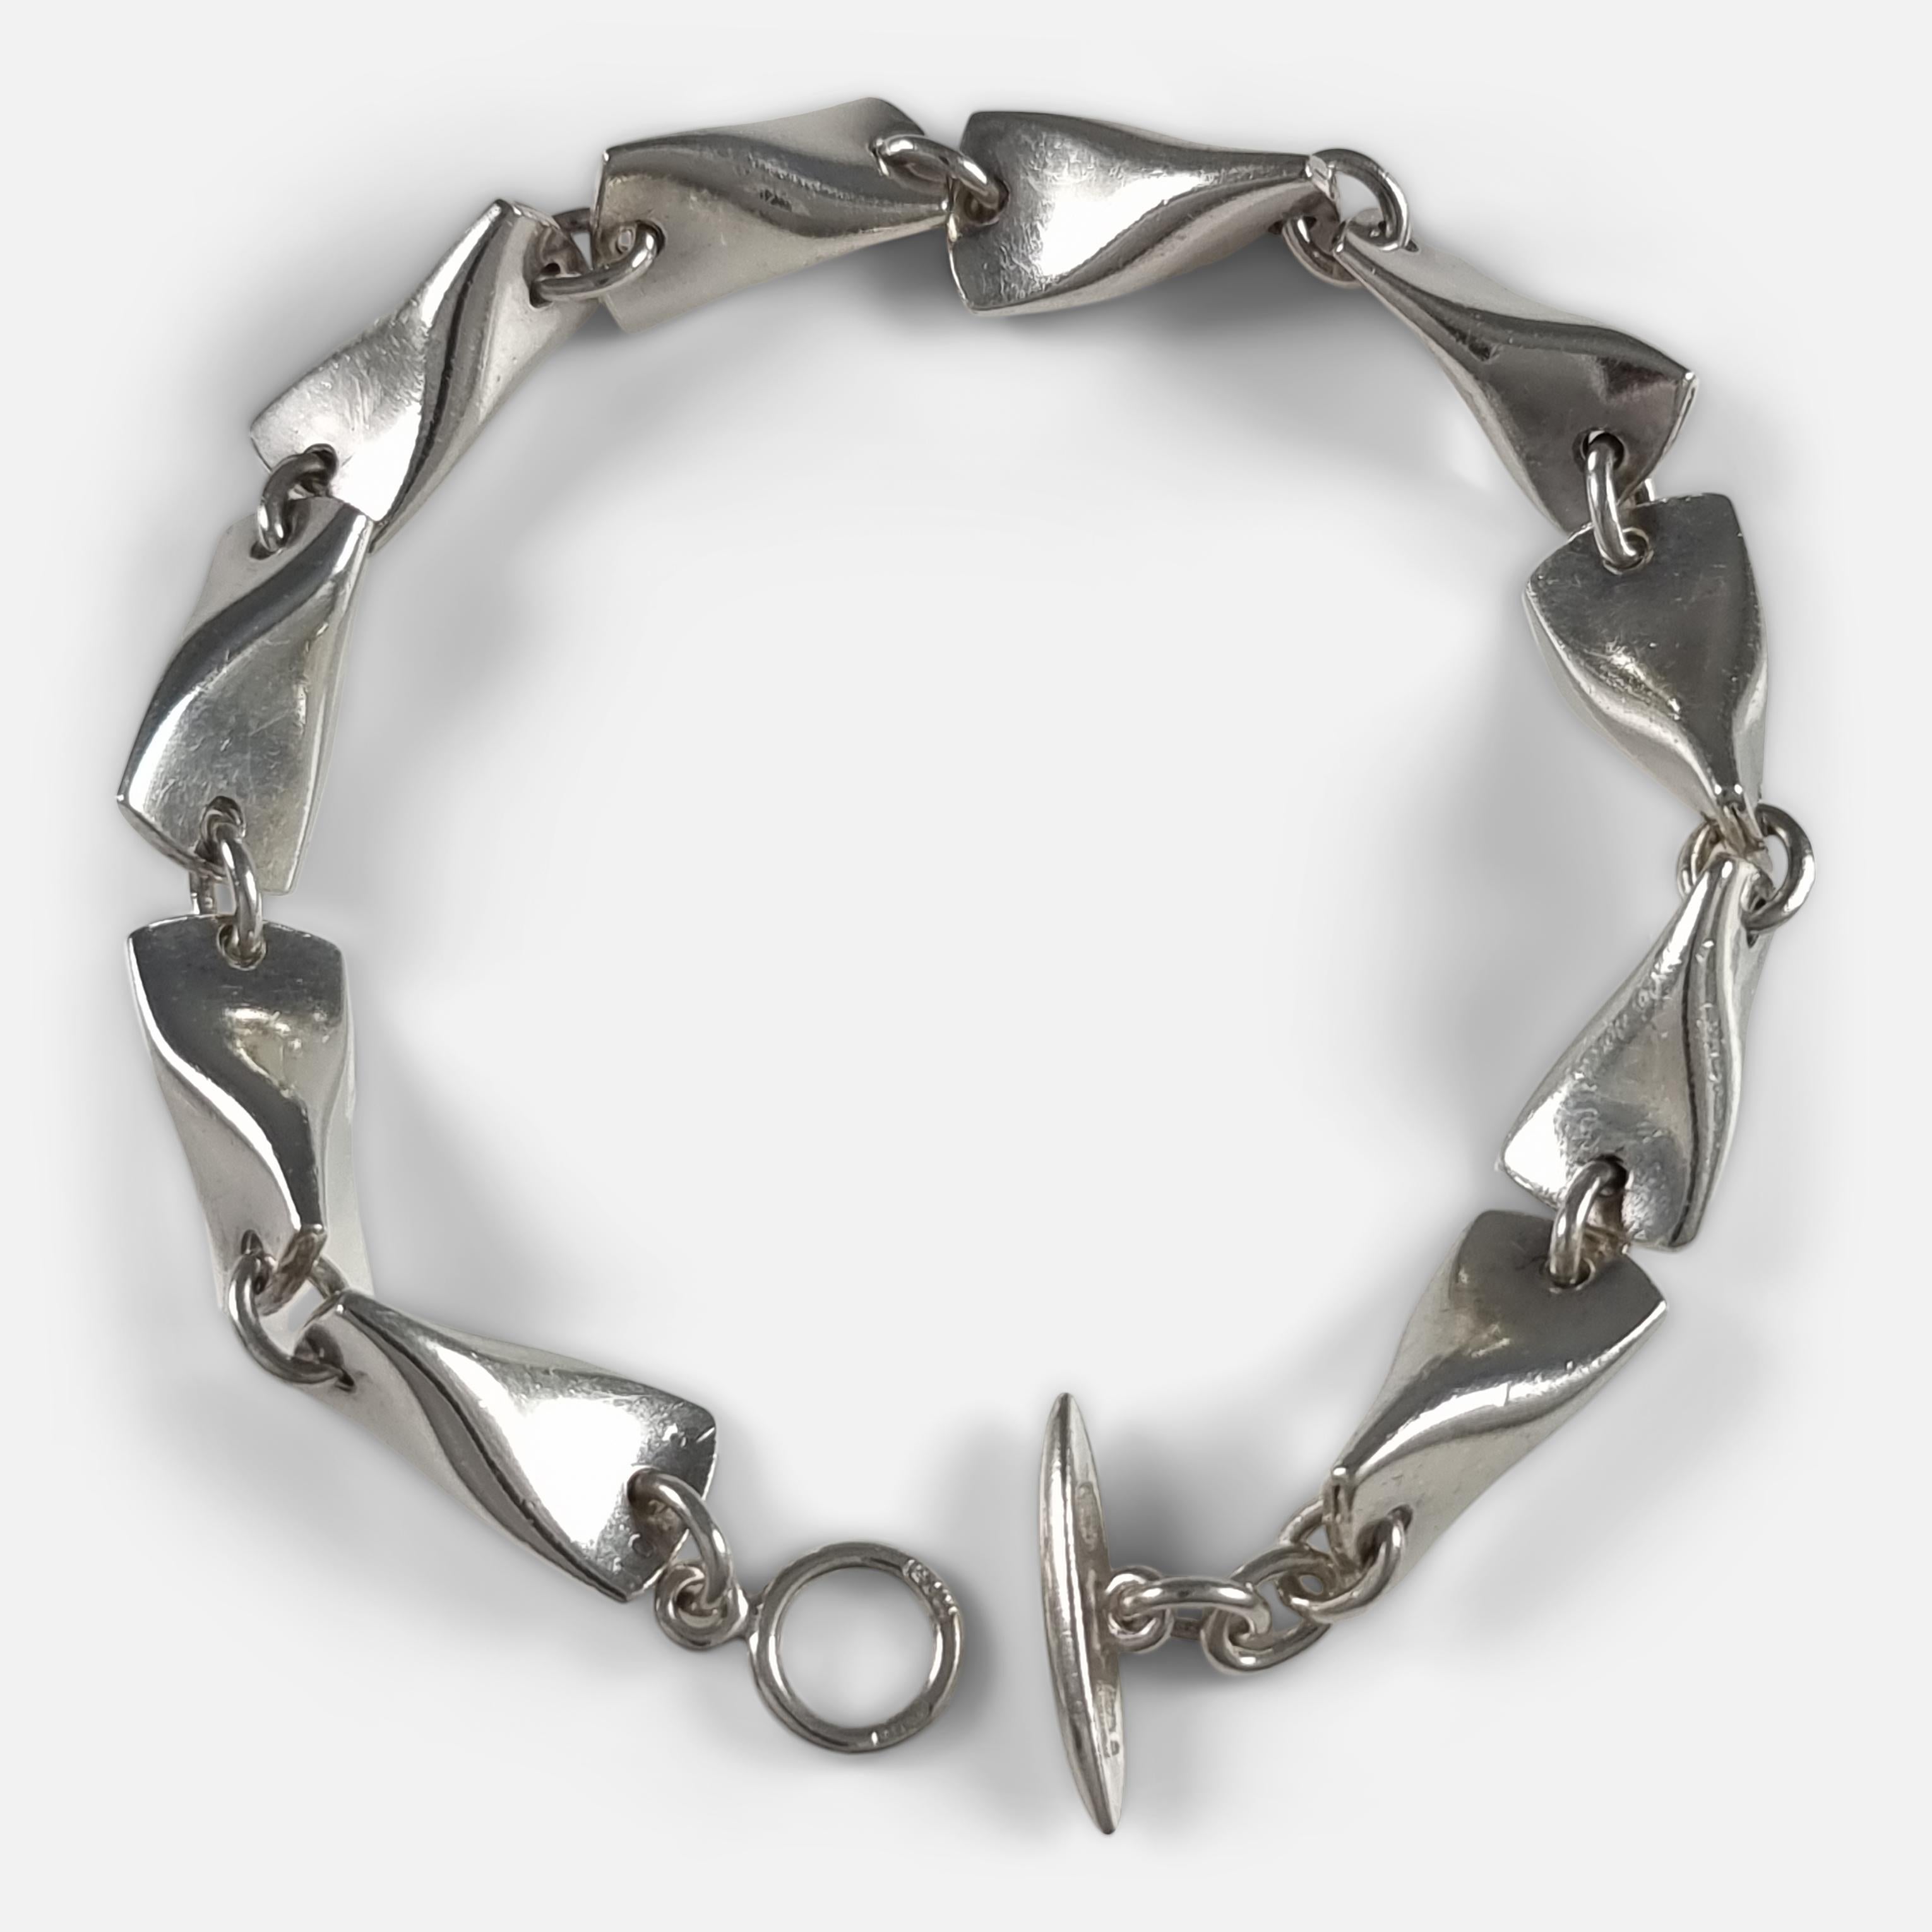 A sterling silver 'Butterfly' Bracelet #104A, designed by Edvard Kindt-Larsen for Georg Jensen.

Stamped with post-1945 Georg Jensen marks, '925S Denmark', '104A', and with London hallmarks for 2000.

Period: - Early 21st century.

Engraving: -